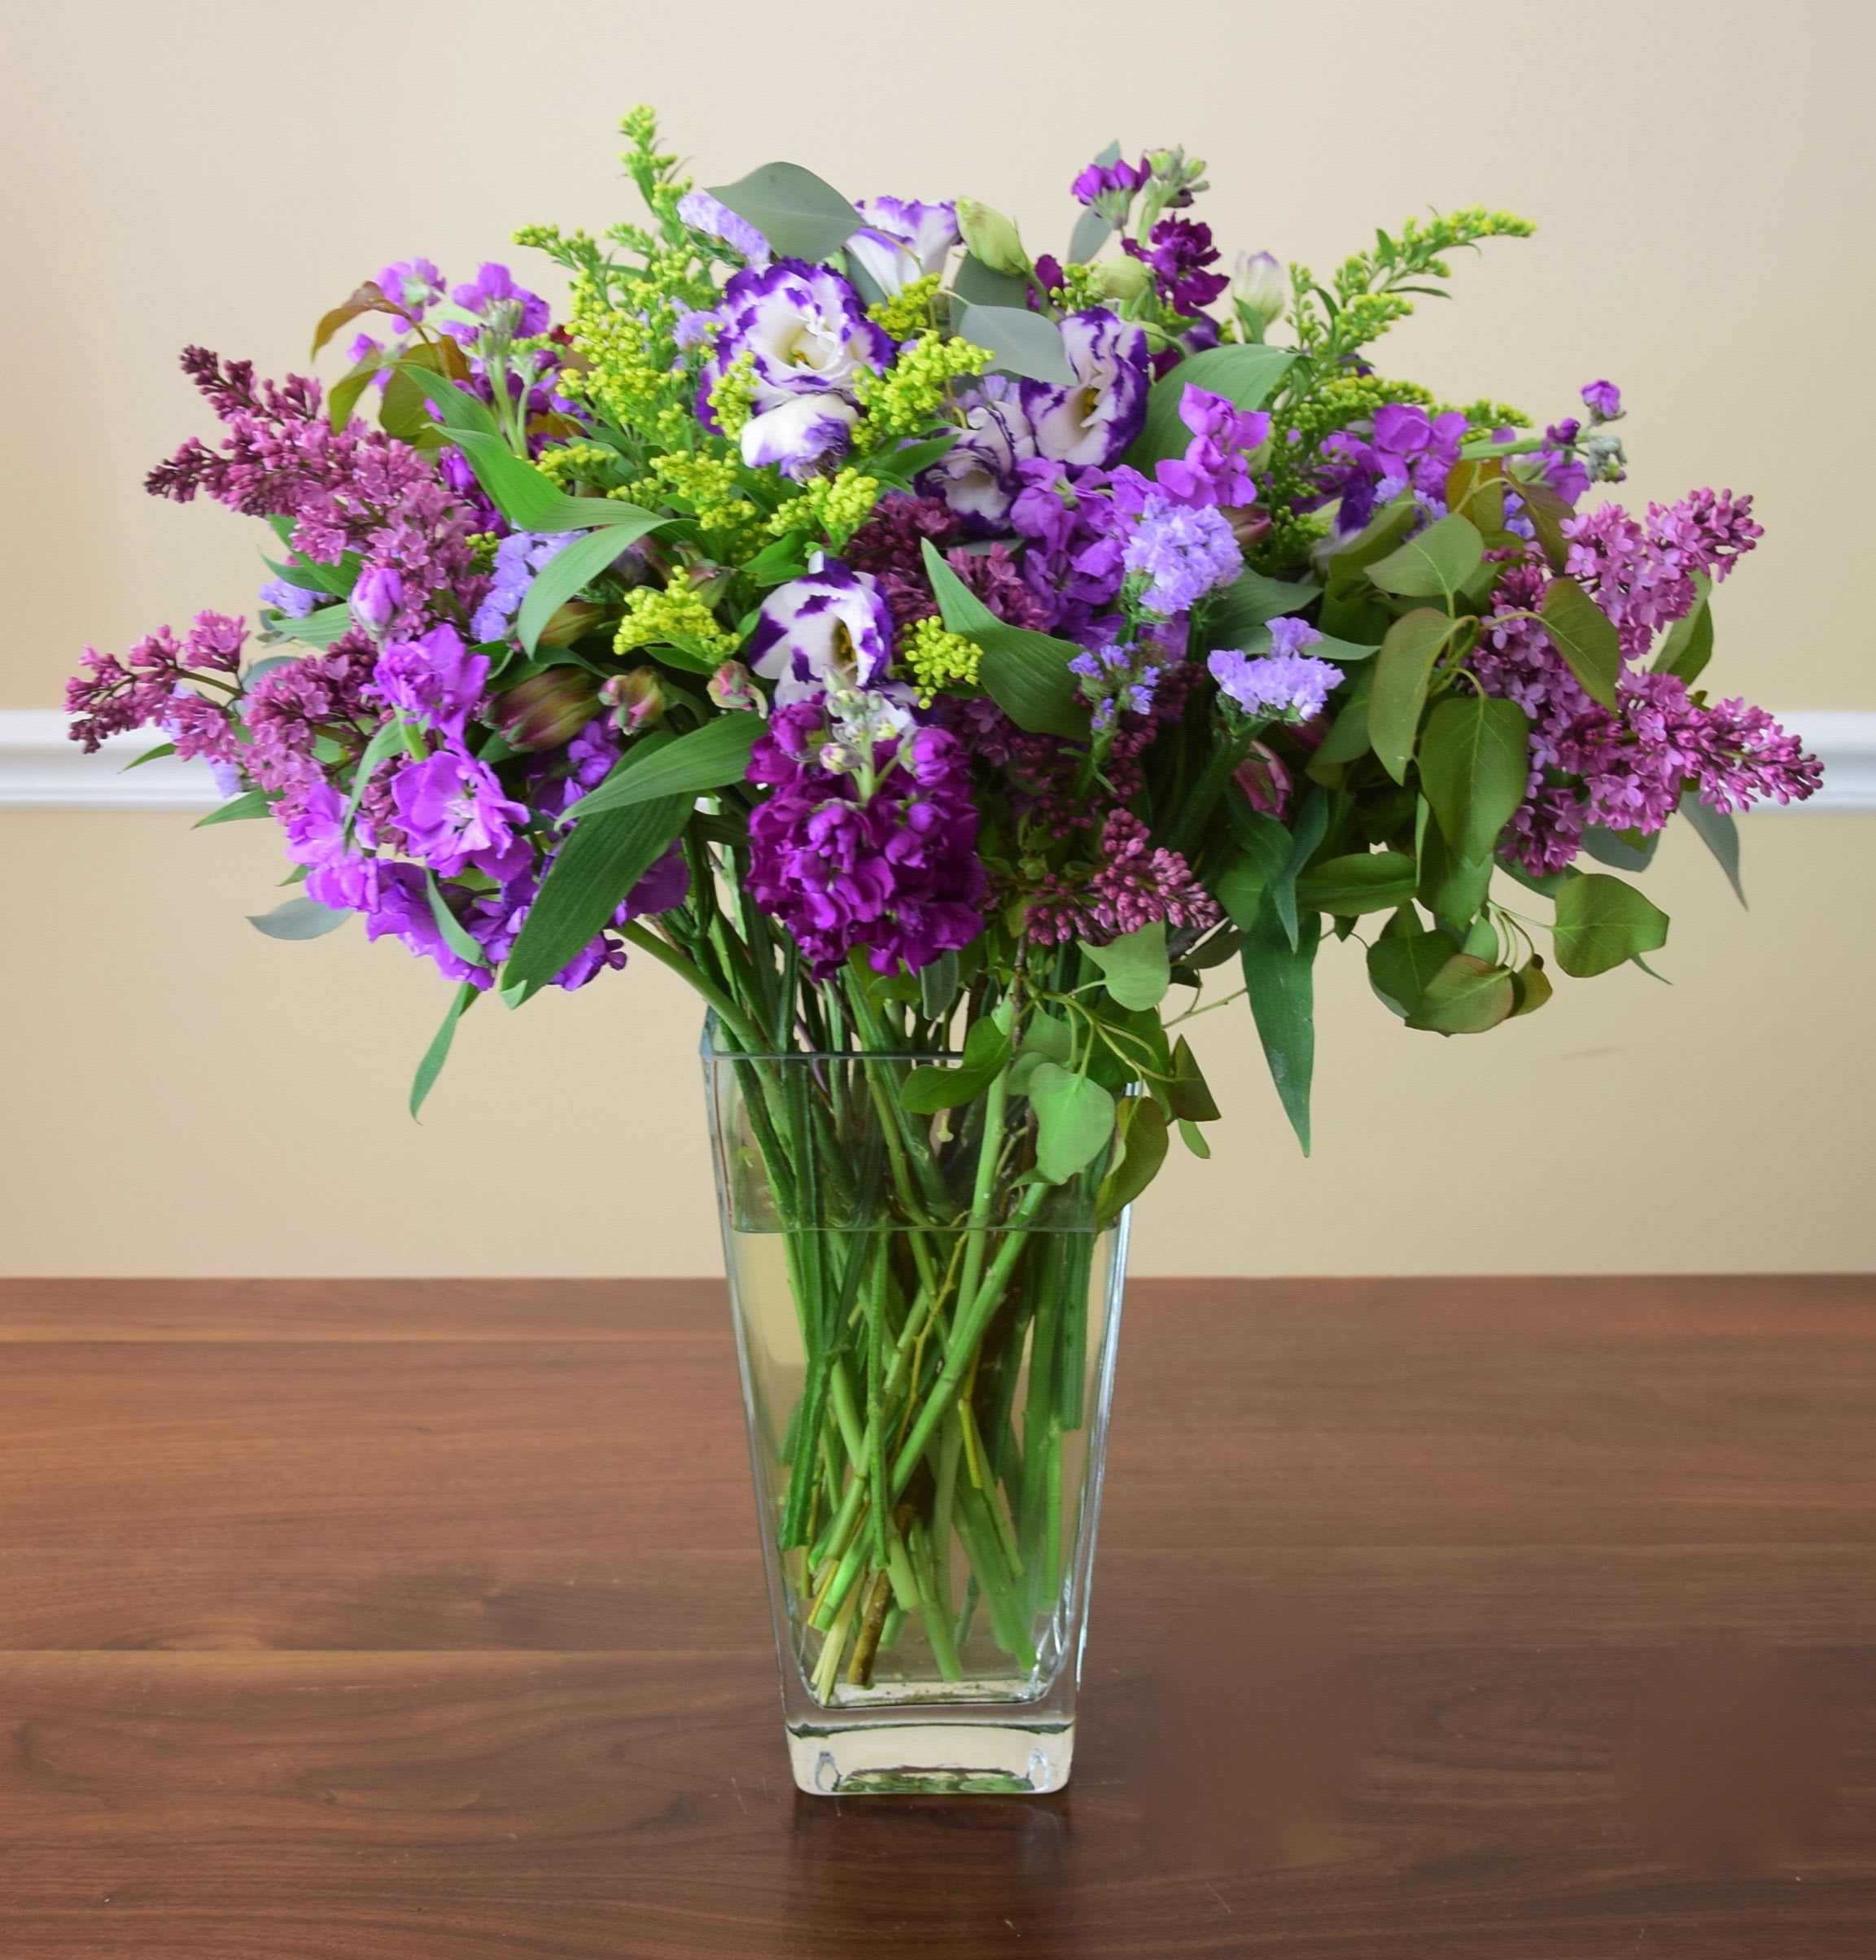 Lovely Lilac  - Beautiful arrangement featuring market fresh purple and lavender flowers carefully designed in a vase.